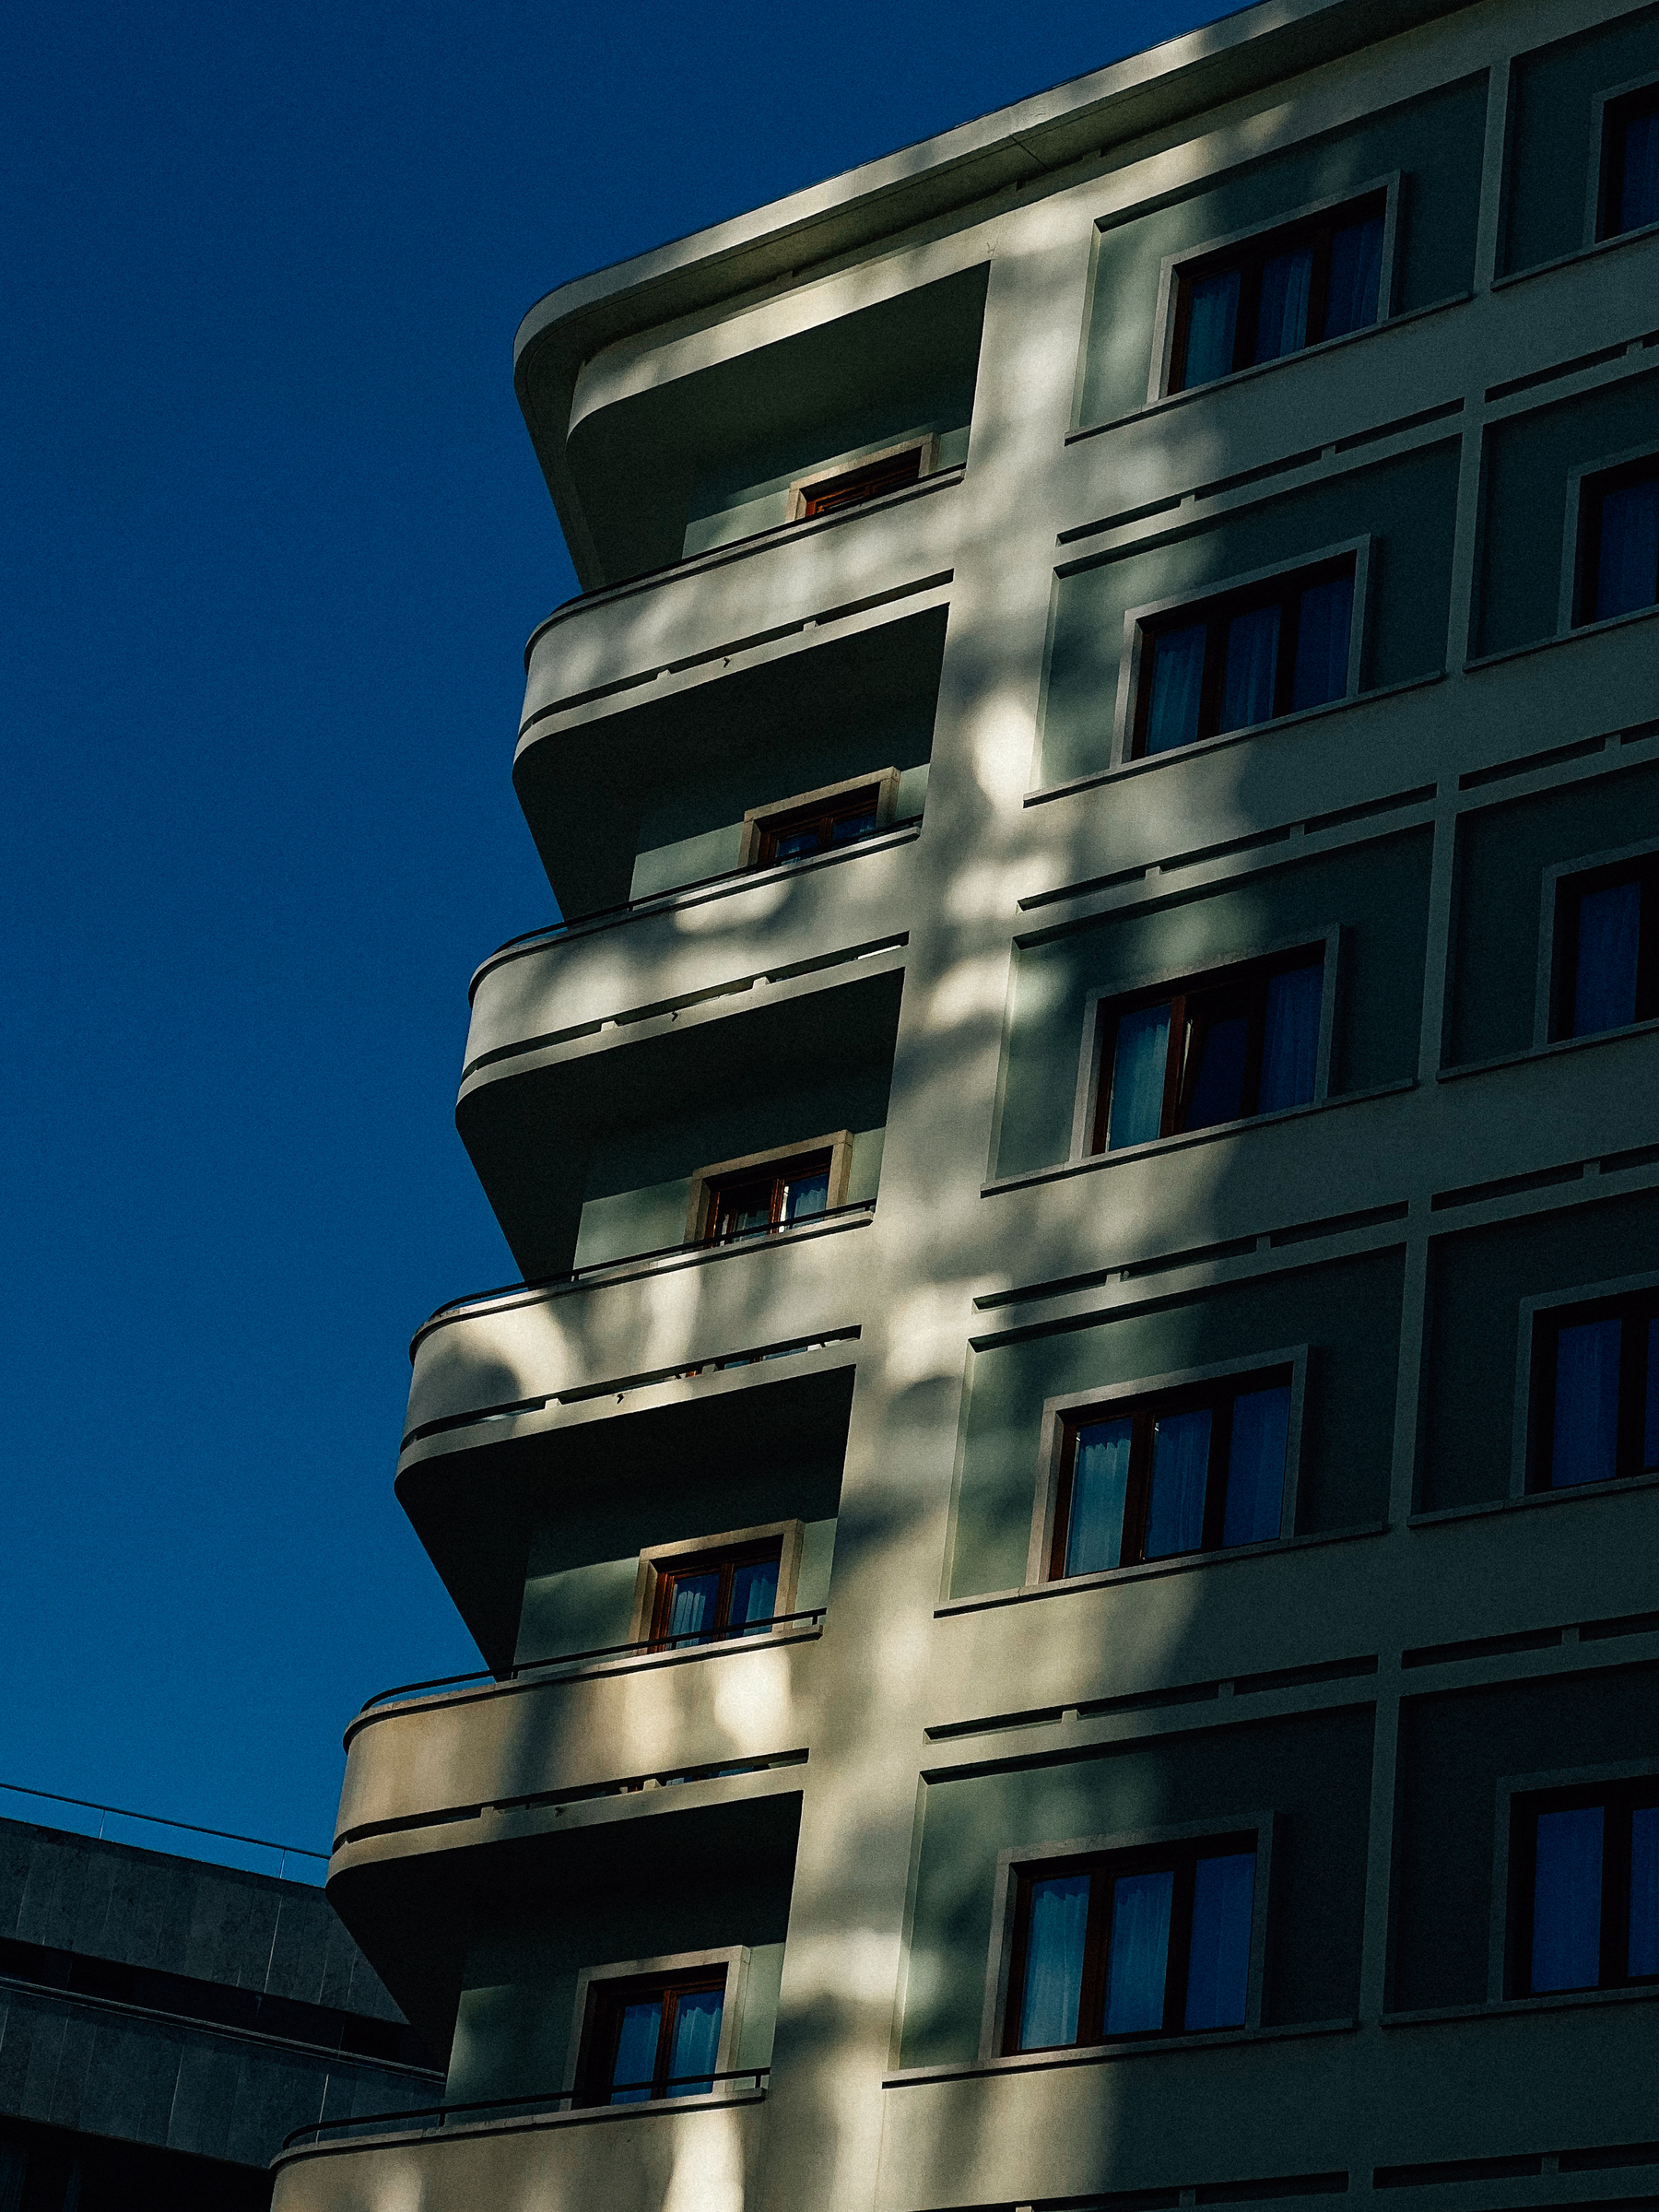 A modern building with curved balconies, featuring shadows and sunlight on its facade under a clear blue sky.